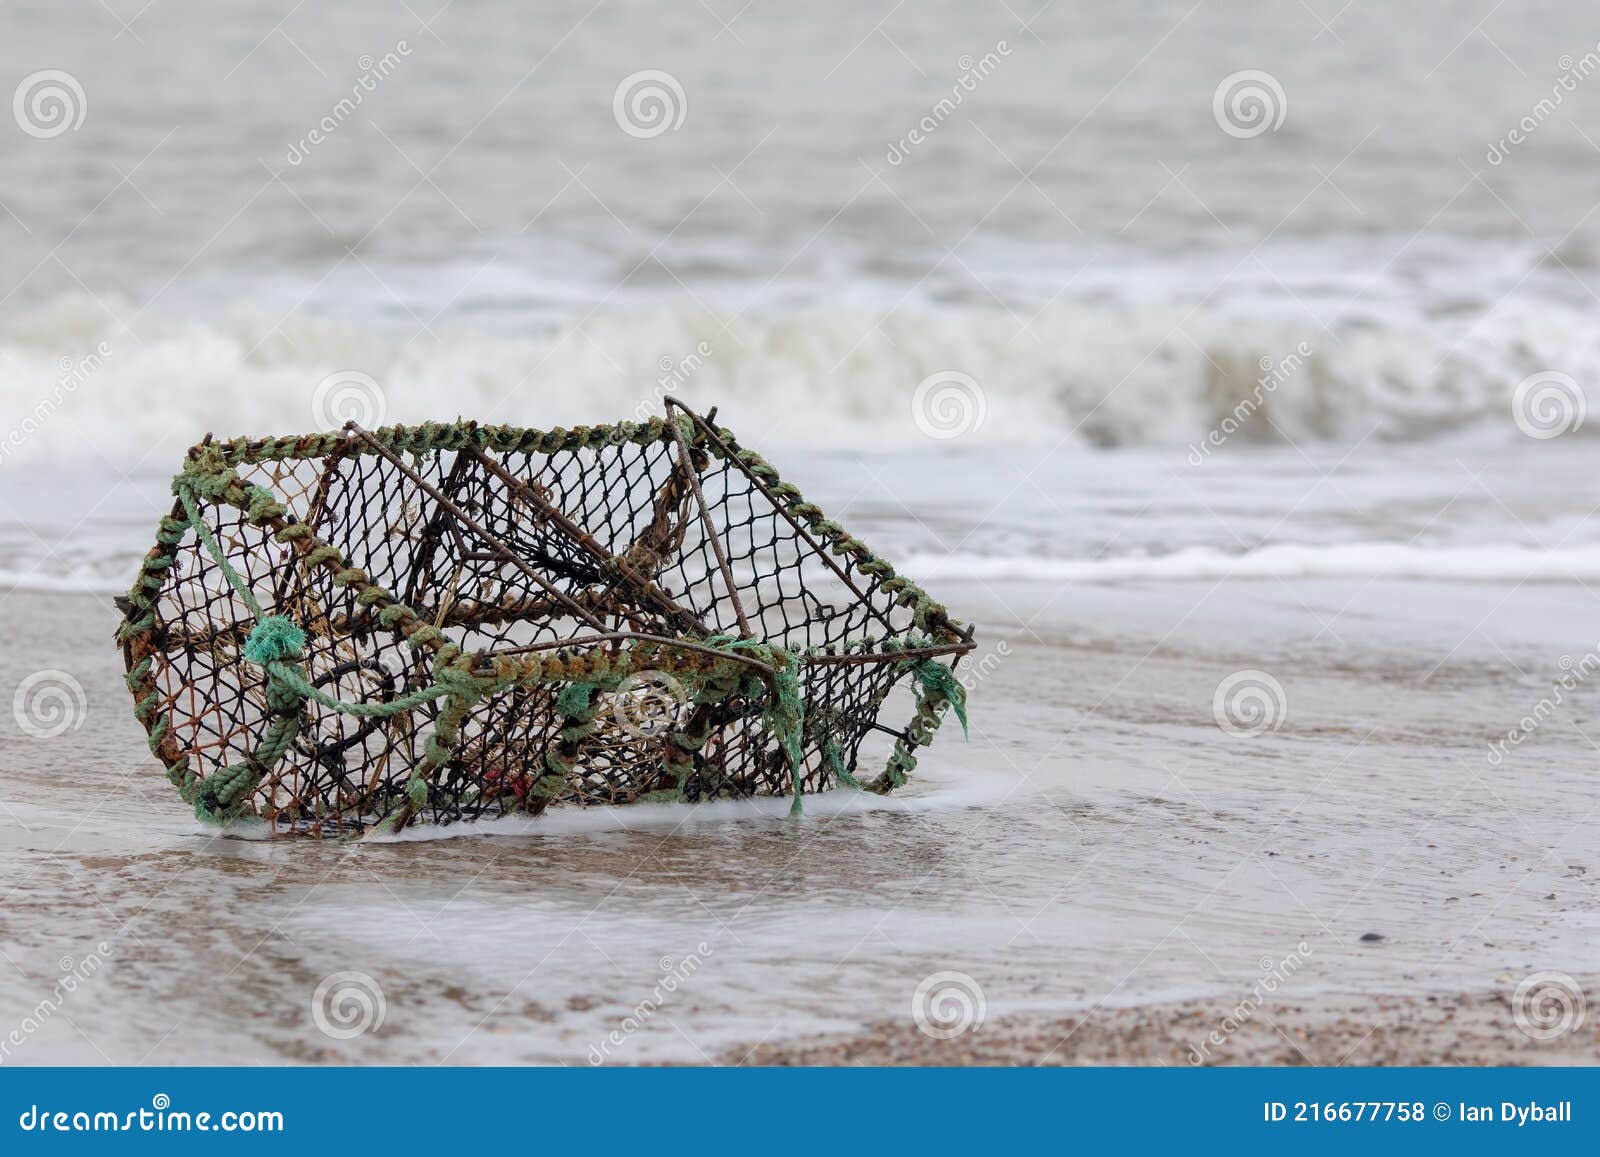 Lobster Creel Washed Up on the Beach. Crab Pot Fishing Basket